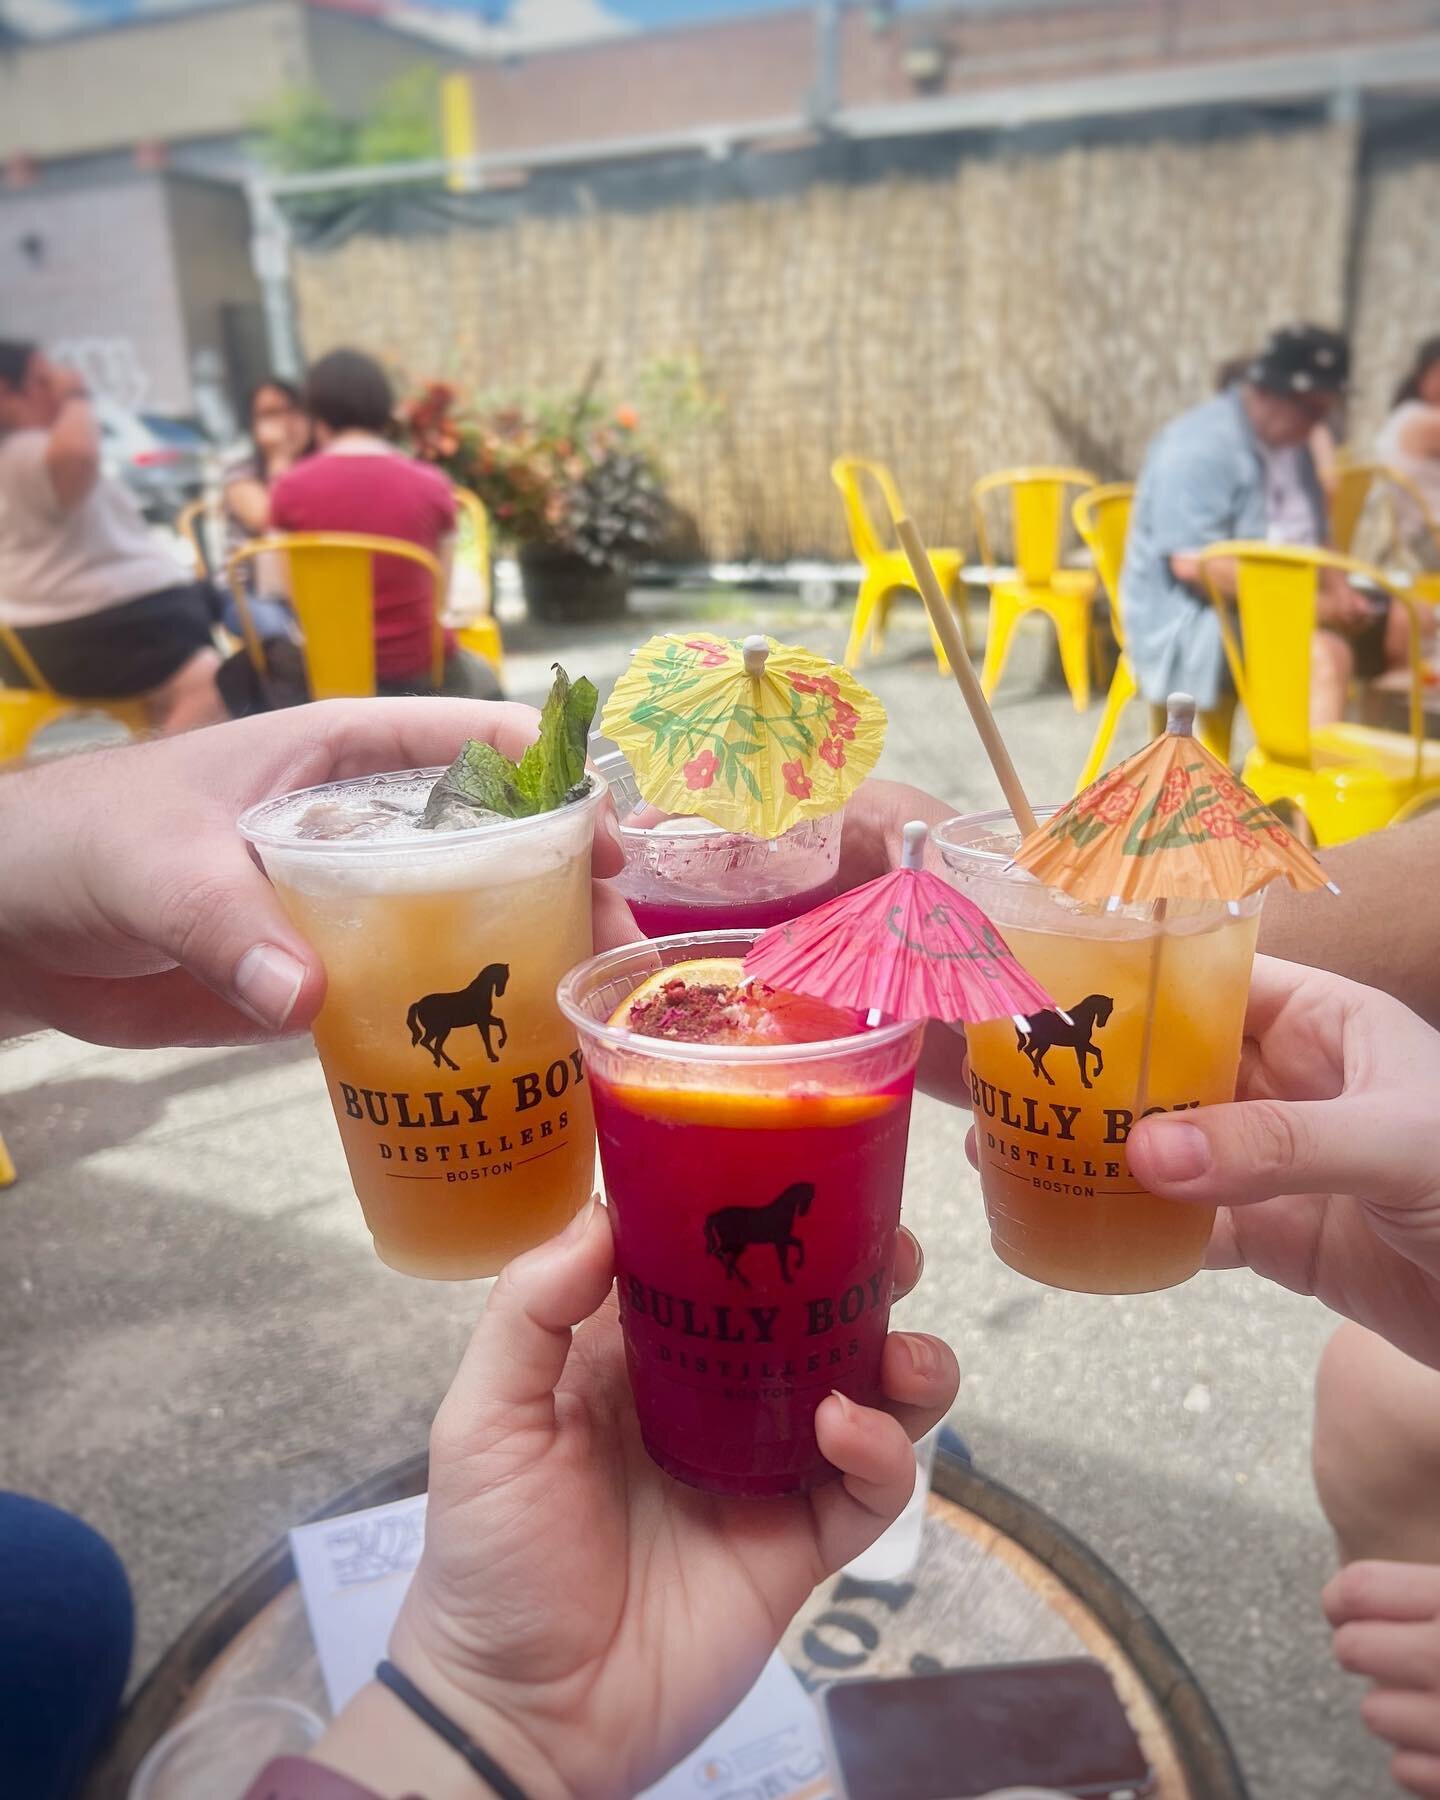 We stepped into a secret Cocktail Garden at @bullyboybooze 🍹 Although we couldn&rsquo;t get a tour of the distillery, their cocktails were delicious! Thanks friends for joining us on our adventures ☺️ T-9 days #BostonBucketList #BestofBoston #verihu